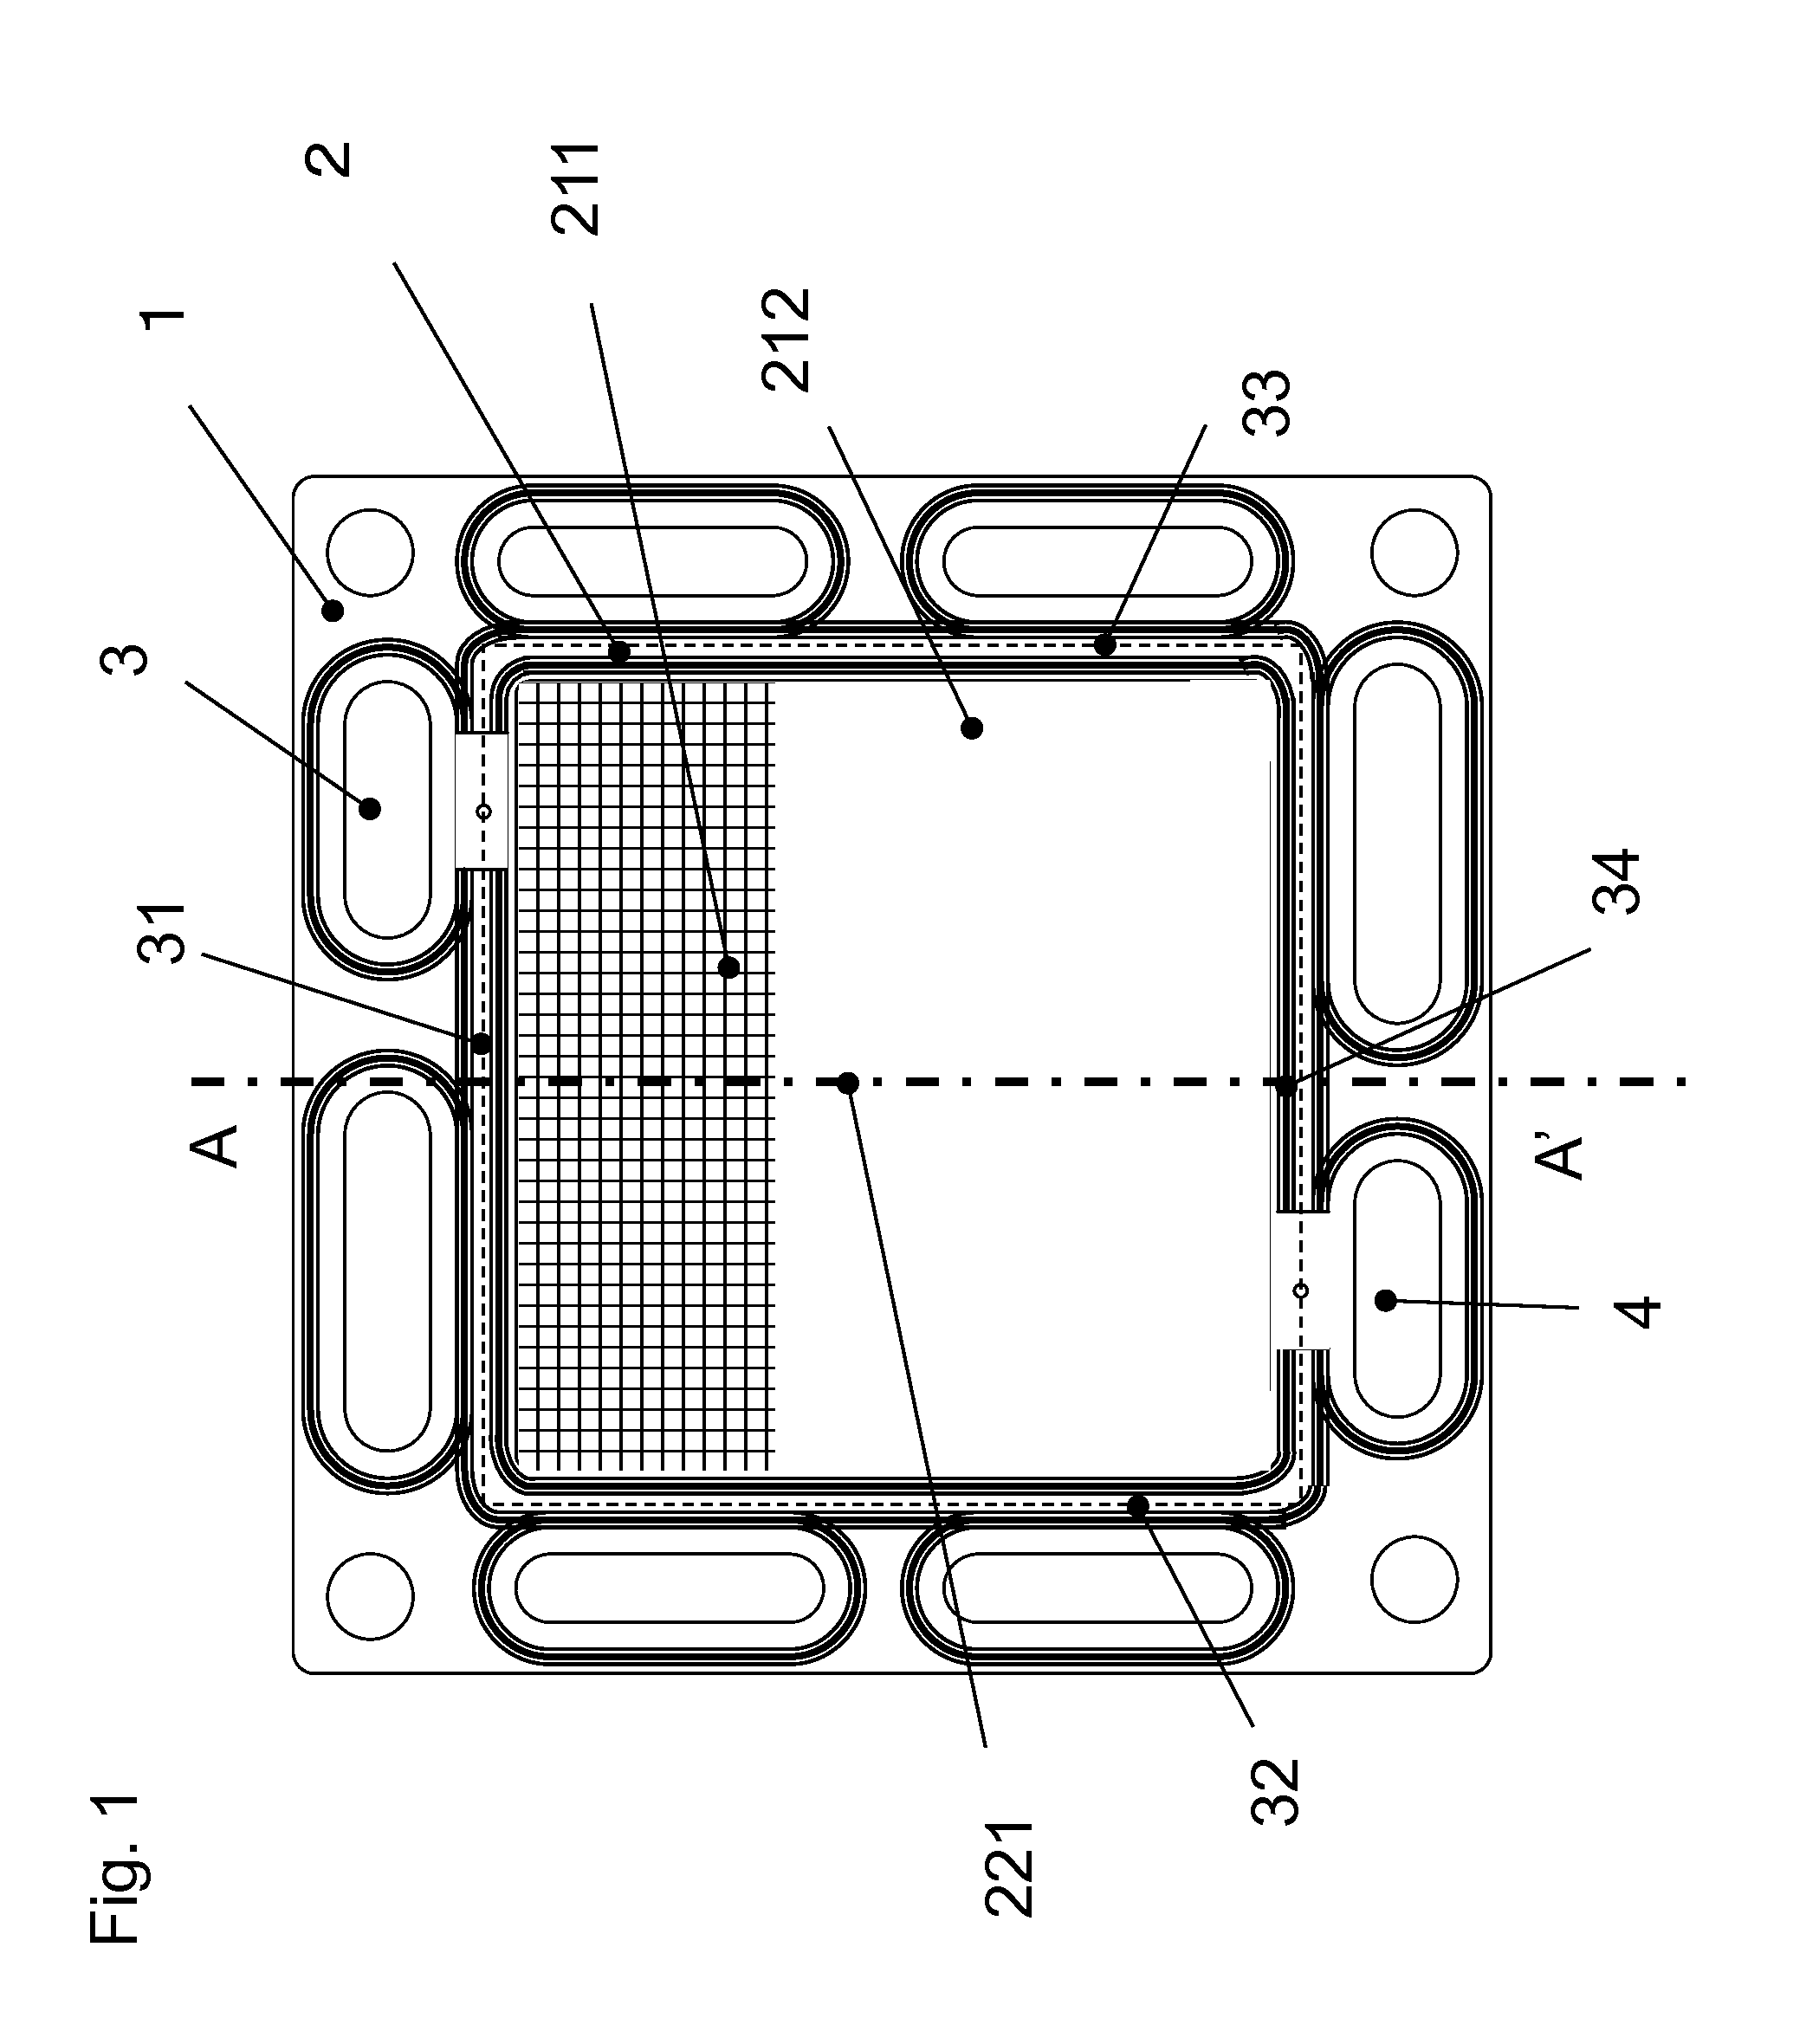 Electrolyte membrane for solid polymer fuel cells, membrane electrode assembly having said electrolyte membrane, and solid polymer fuel cell